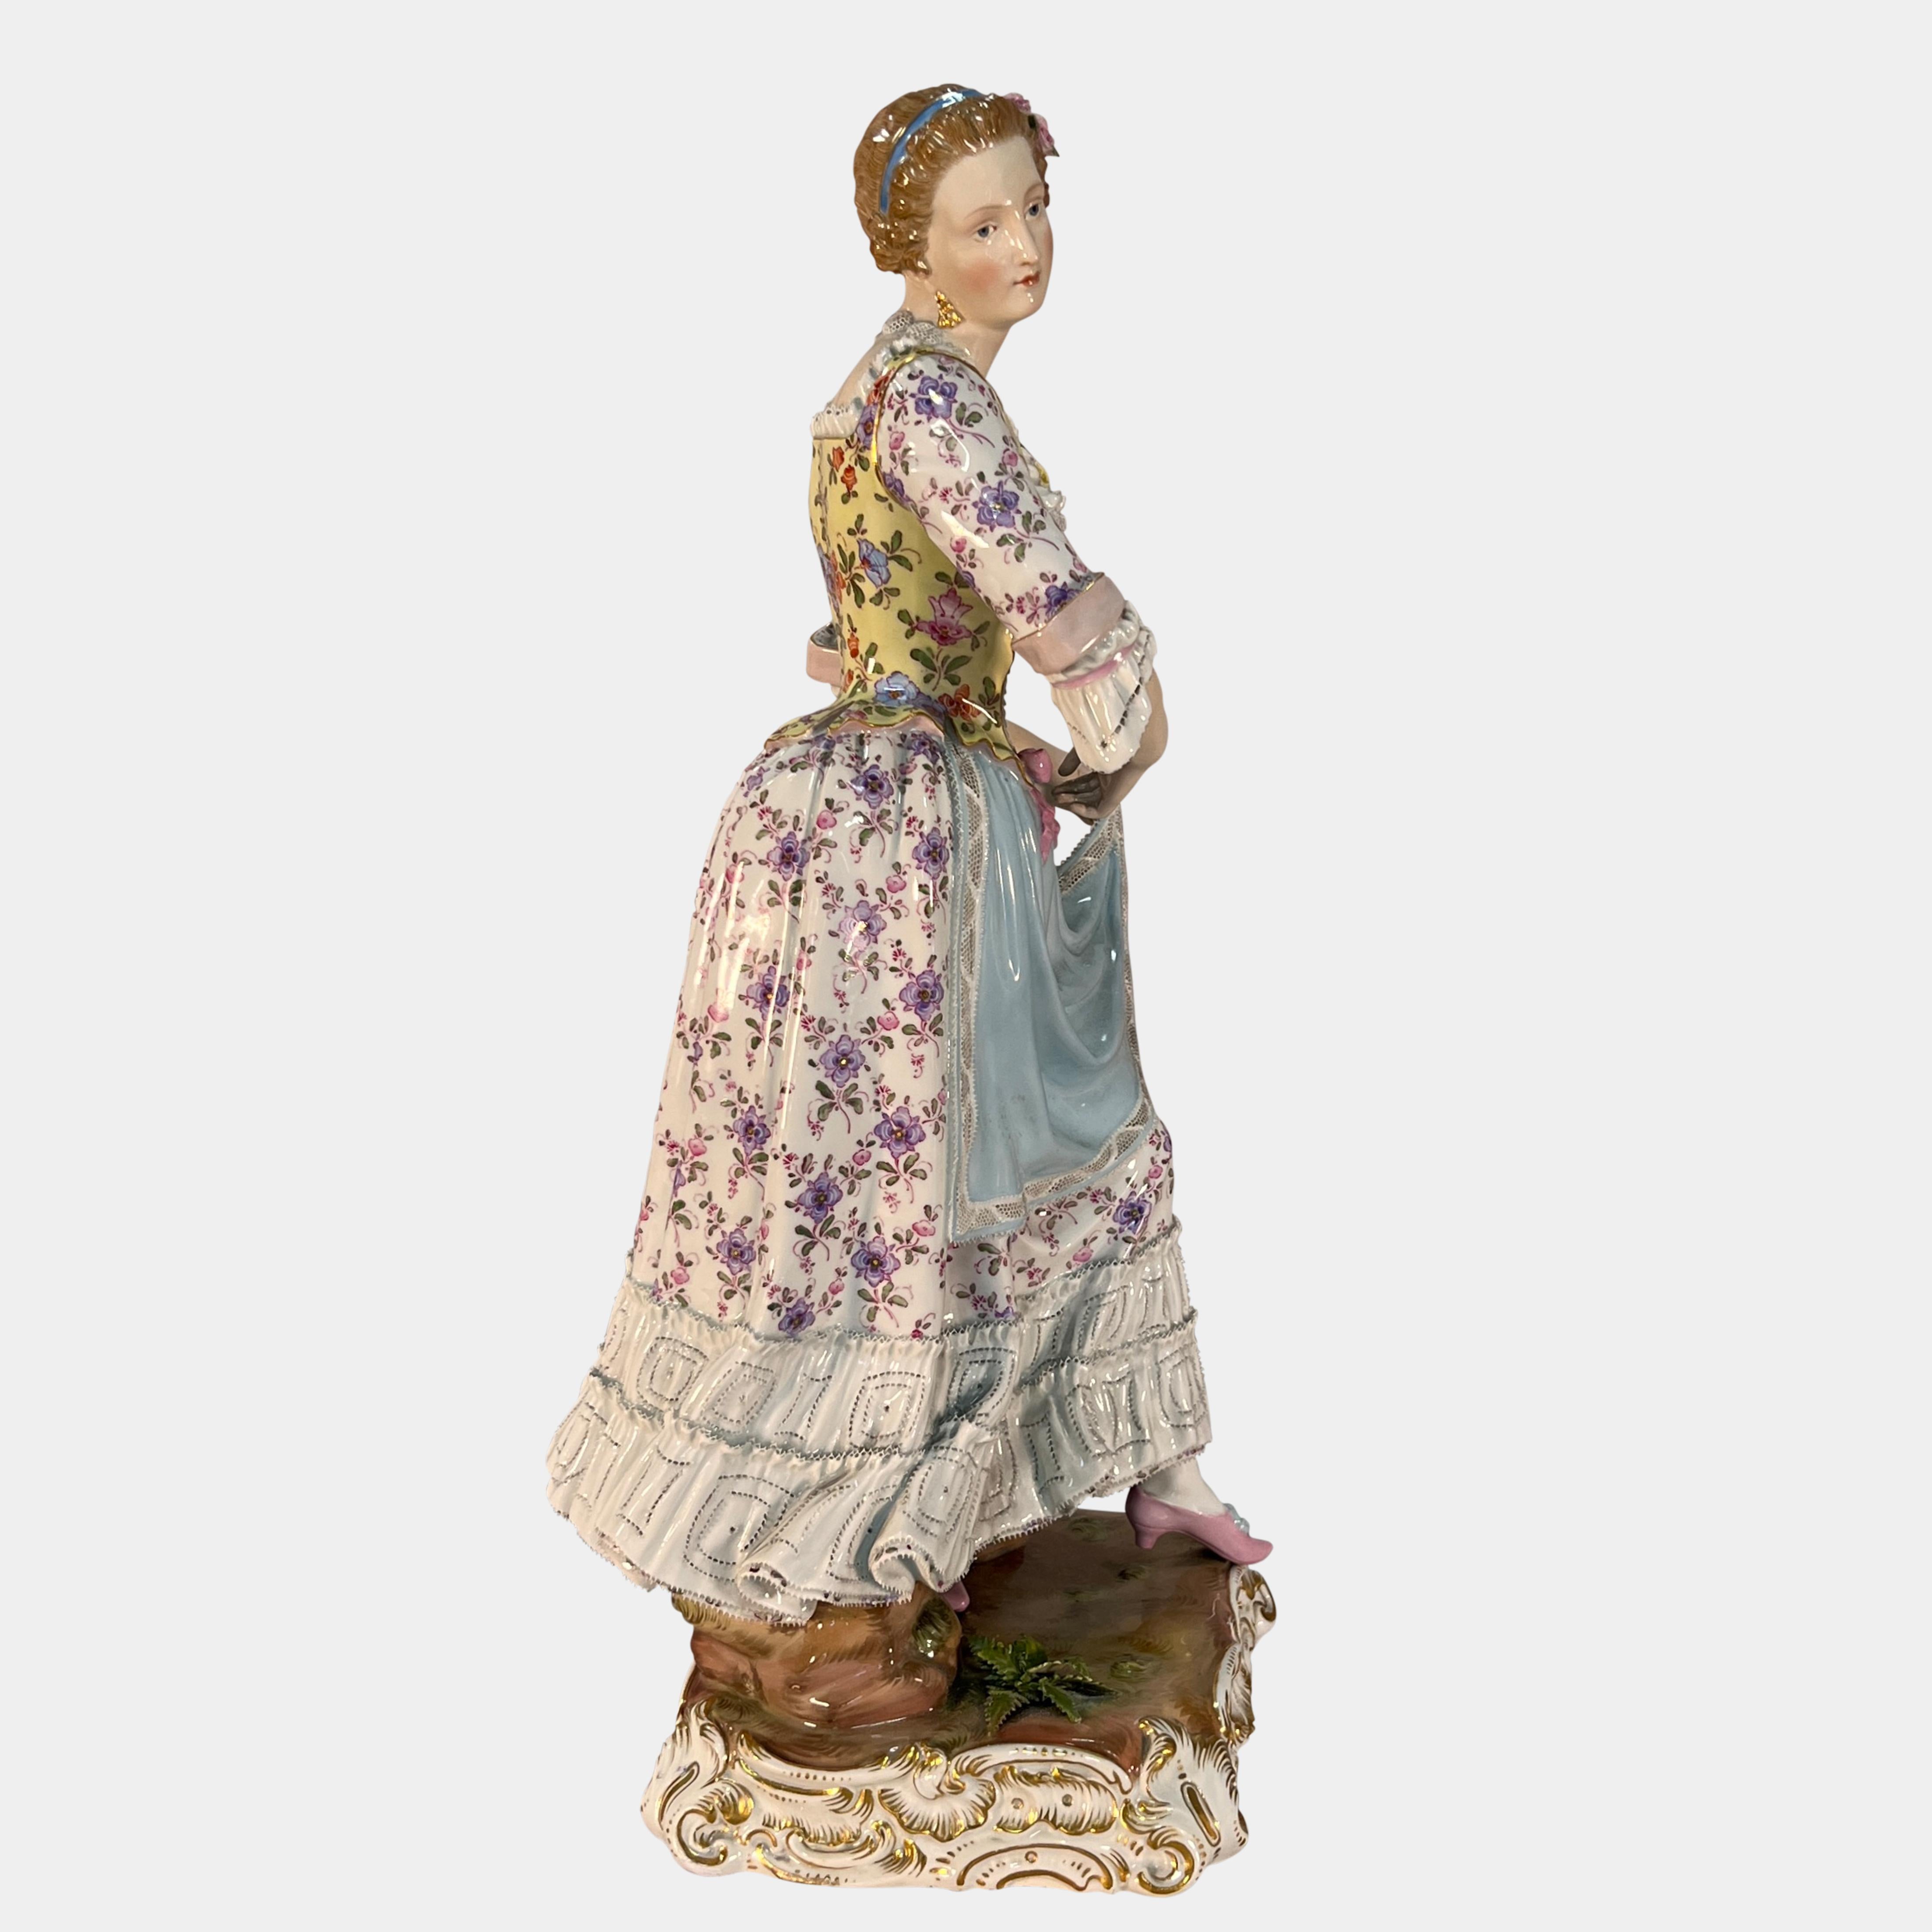 A beautiful large 19th century Meissen porcelain figure depicting a standing maiden in period dress with elaborate floral decoration raising her apron. her corset and borders made from fine dipped lace. The figure is supported by a rock and is based